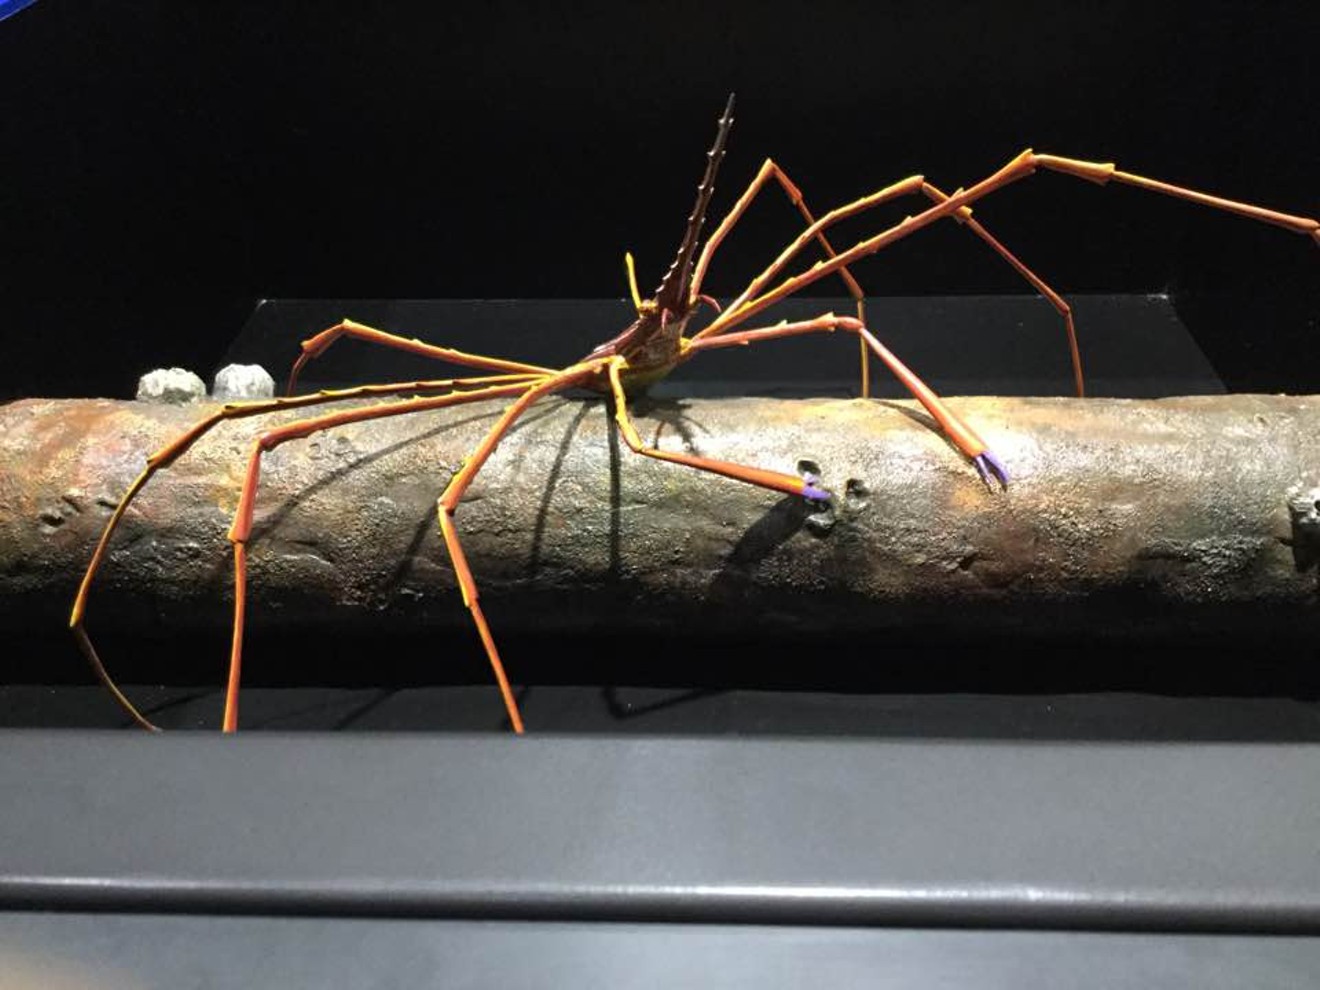 A model of an arrow crab at Moody Gardens